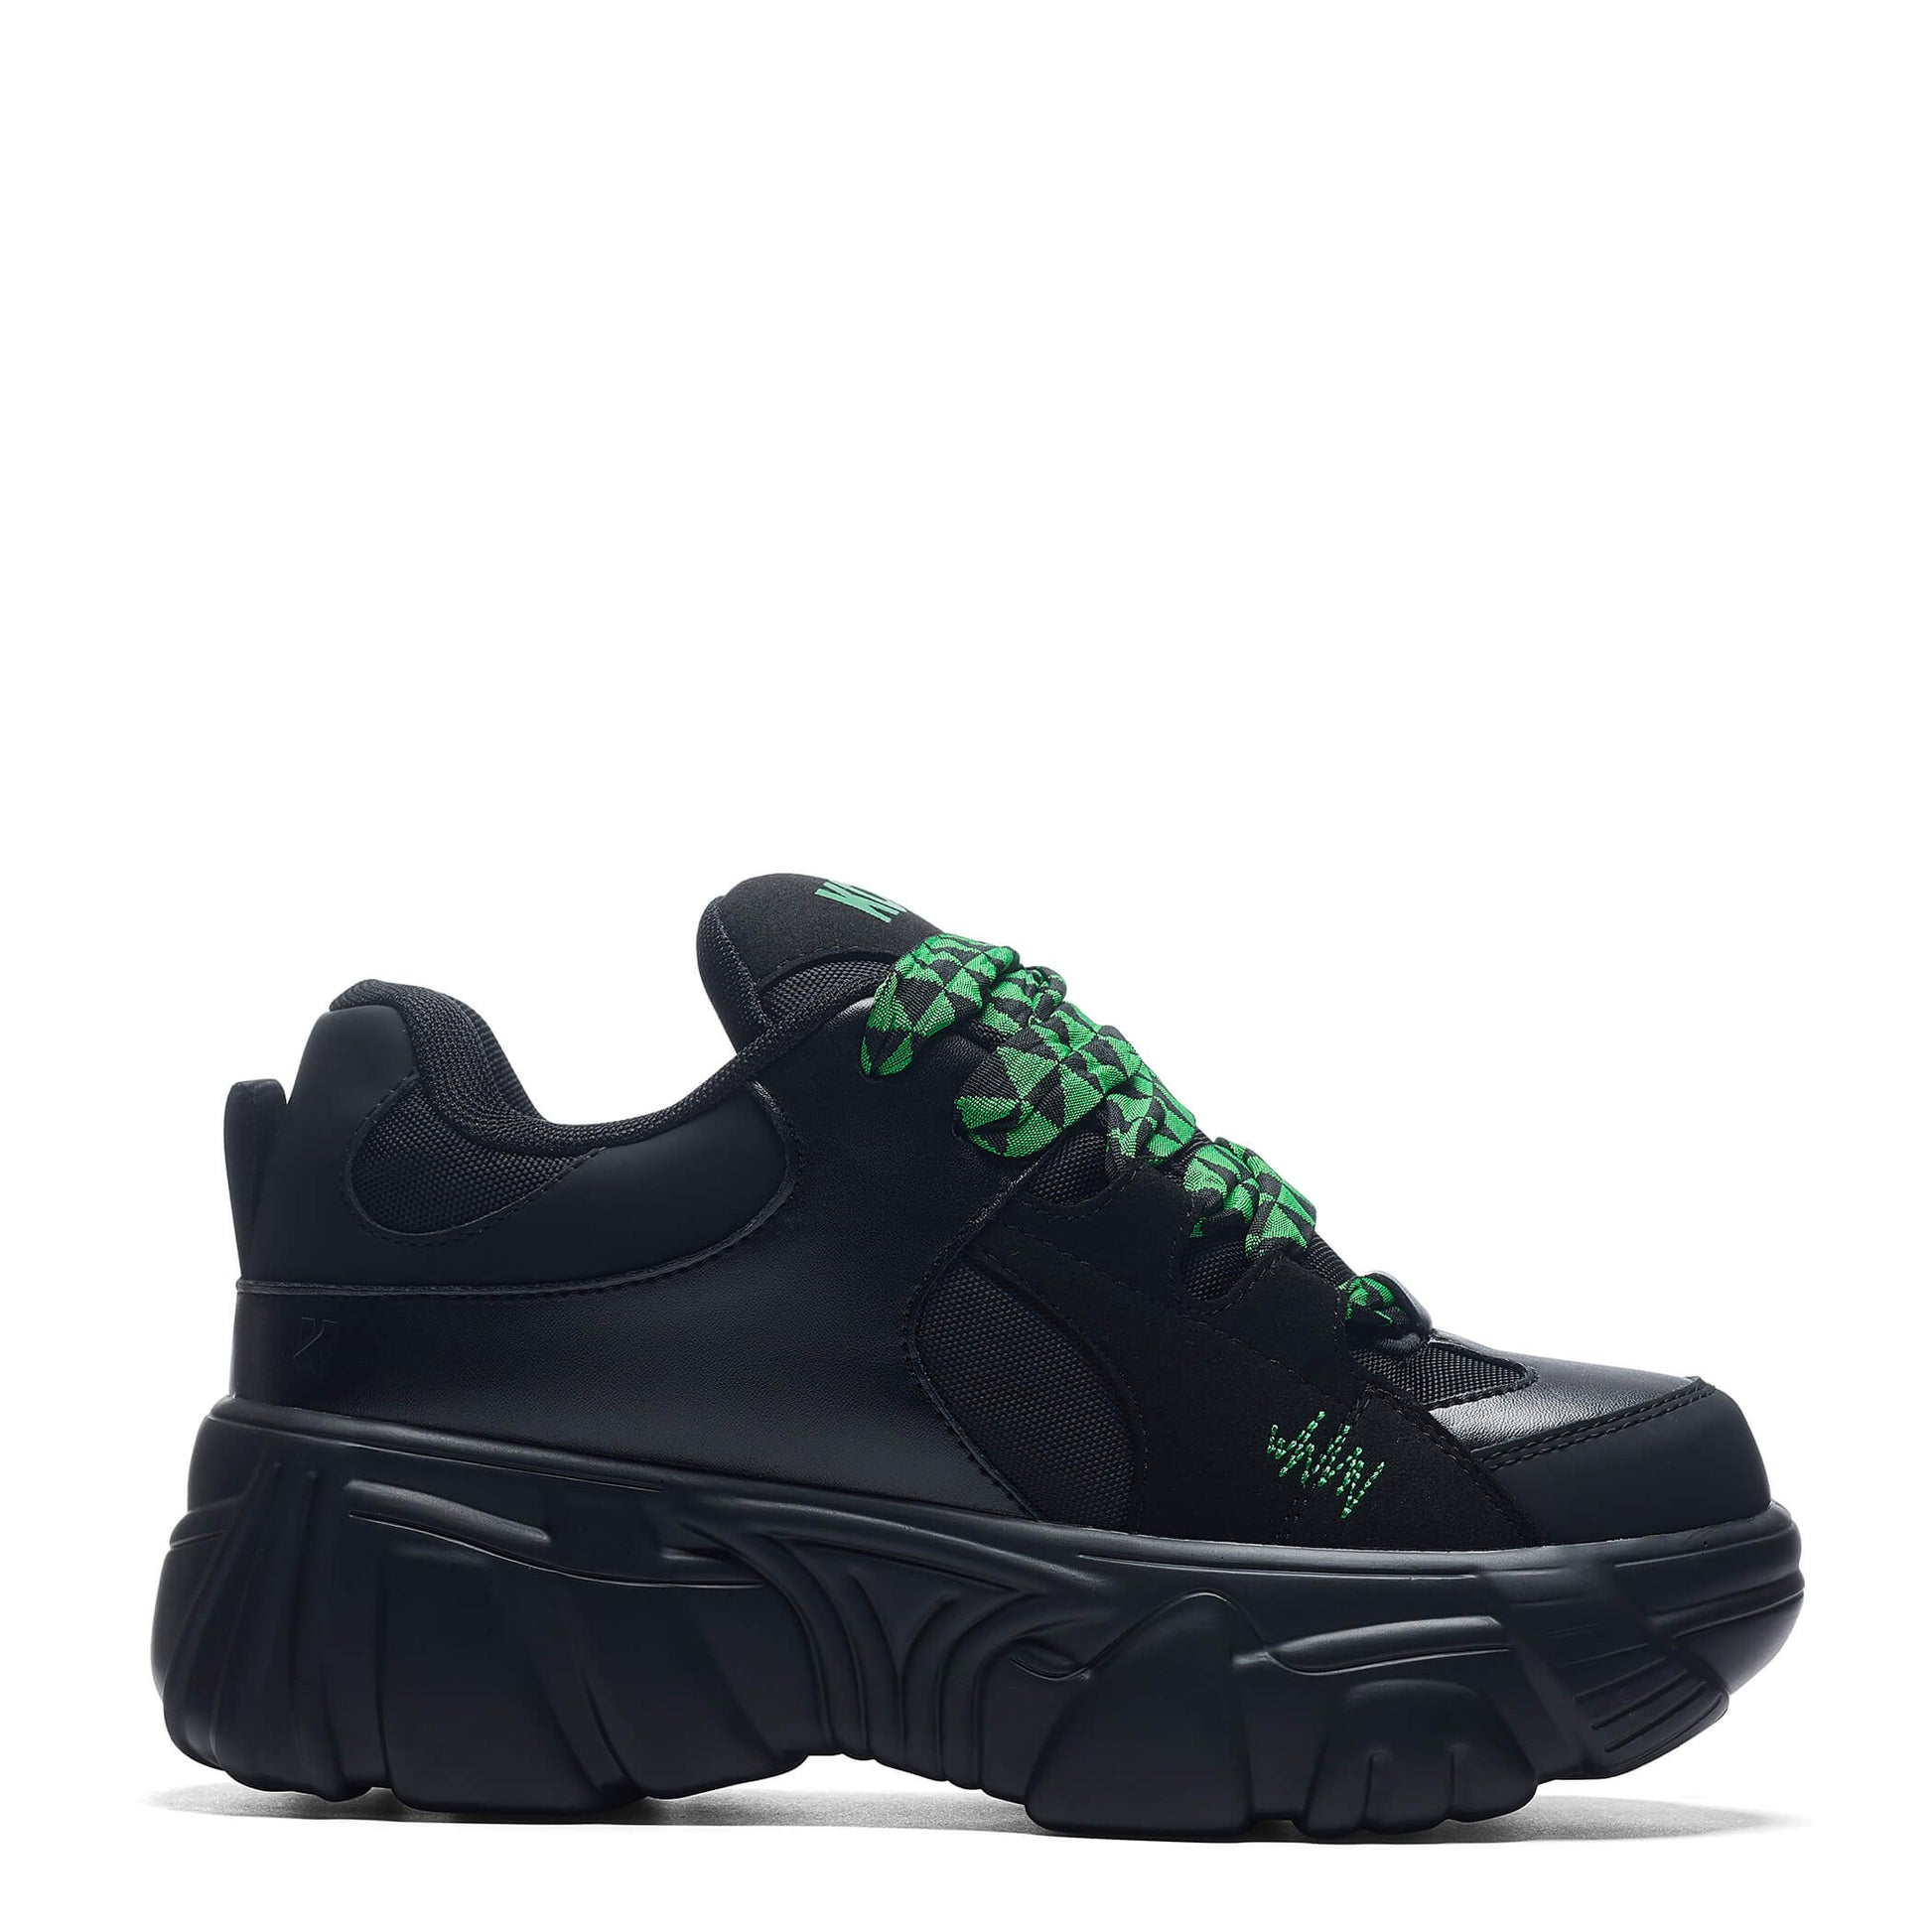 Ricta Flip Chunky Trainers - Green Lace - Trainers - KOI Footwear - Black - Side View